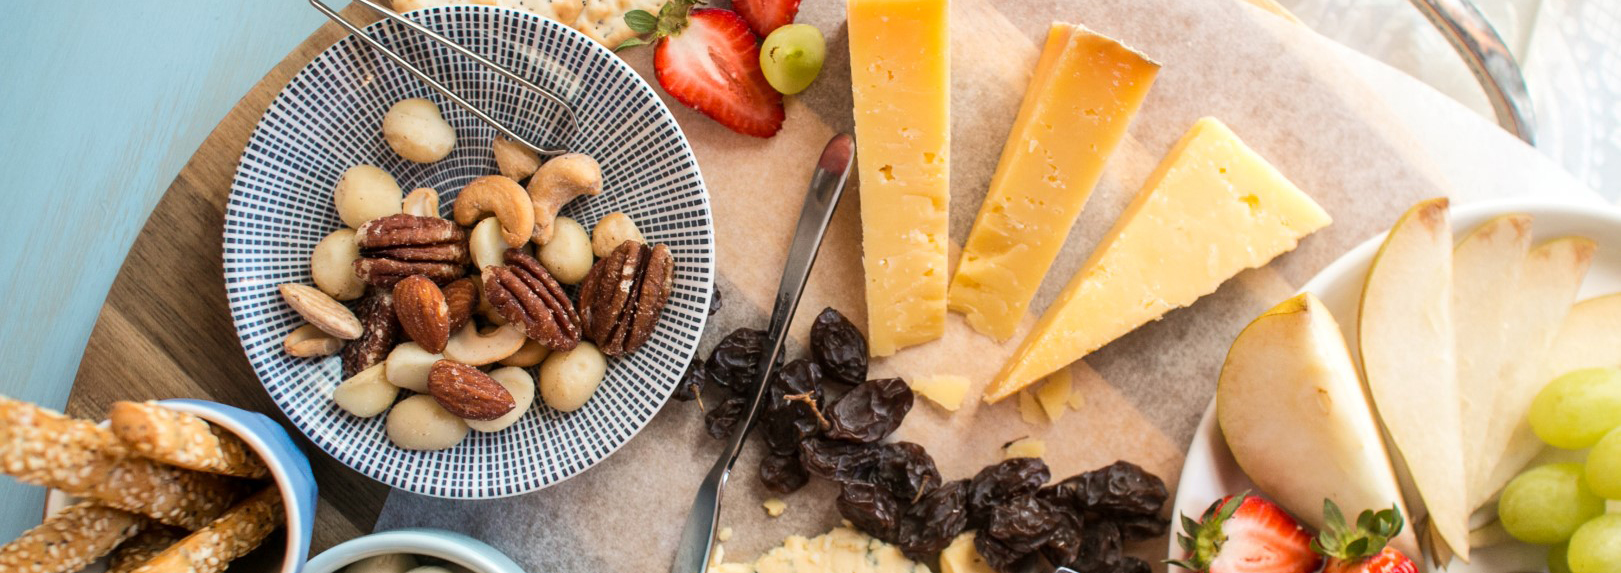 assorted cheese and nuts on board